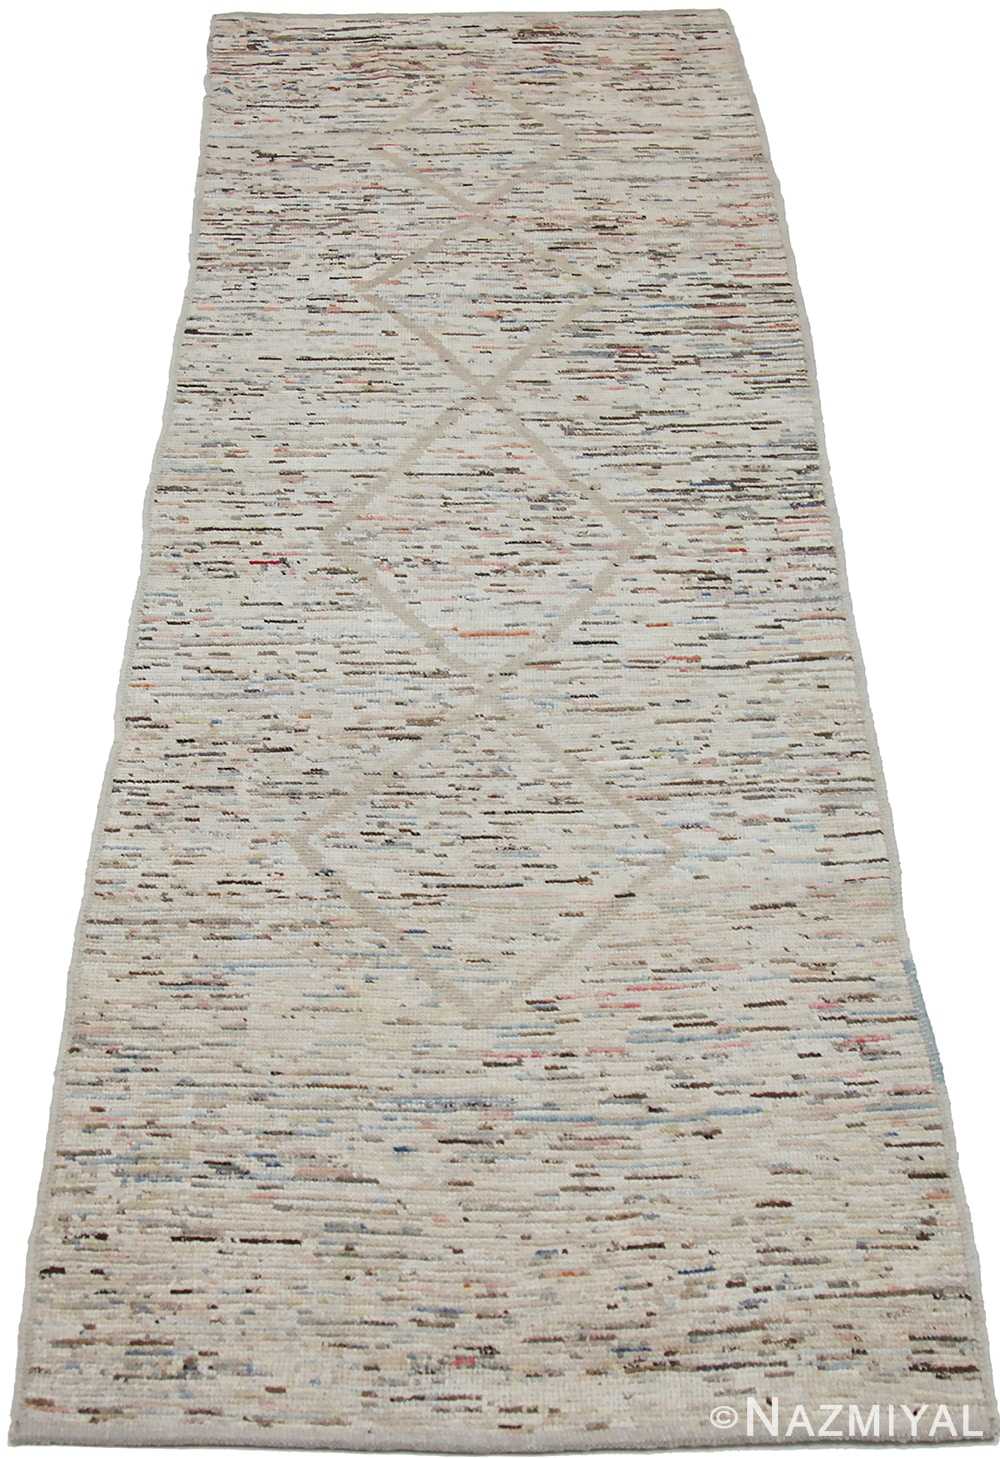 Whole View Of Beige Modern Moroccan Style Afghan Runner Rug 60188 by Nazmiyal NYC